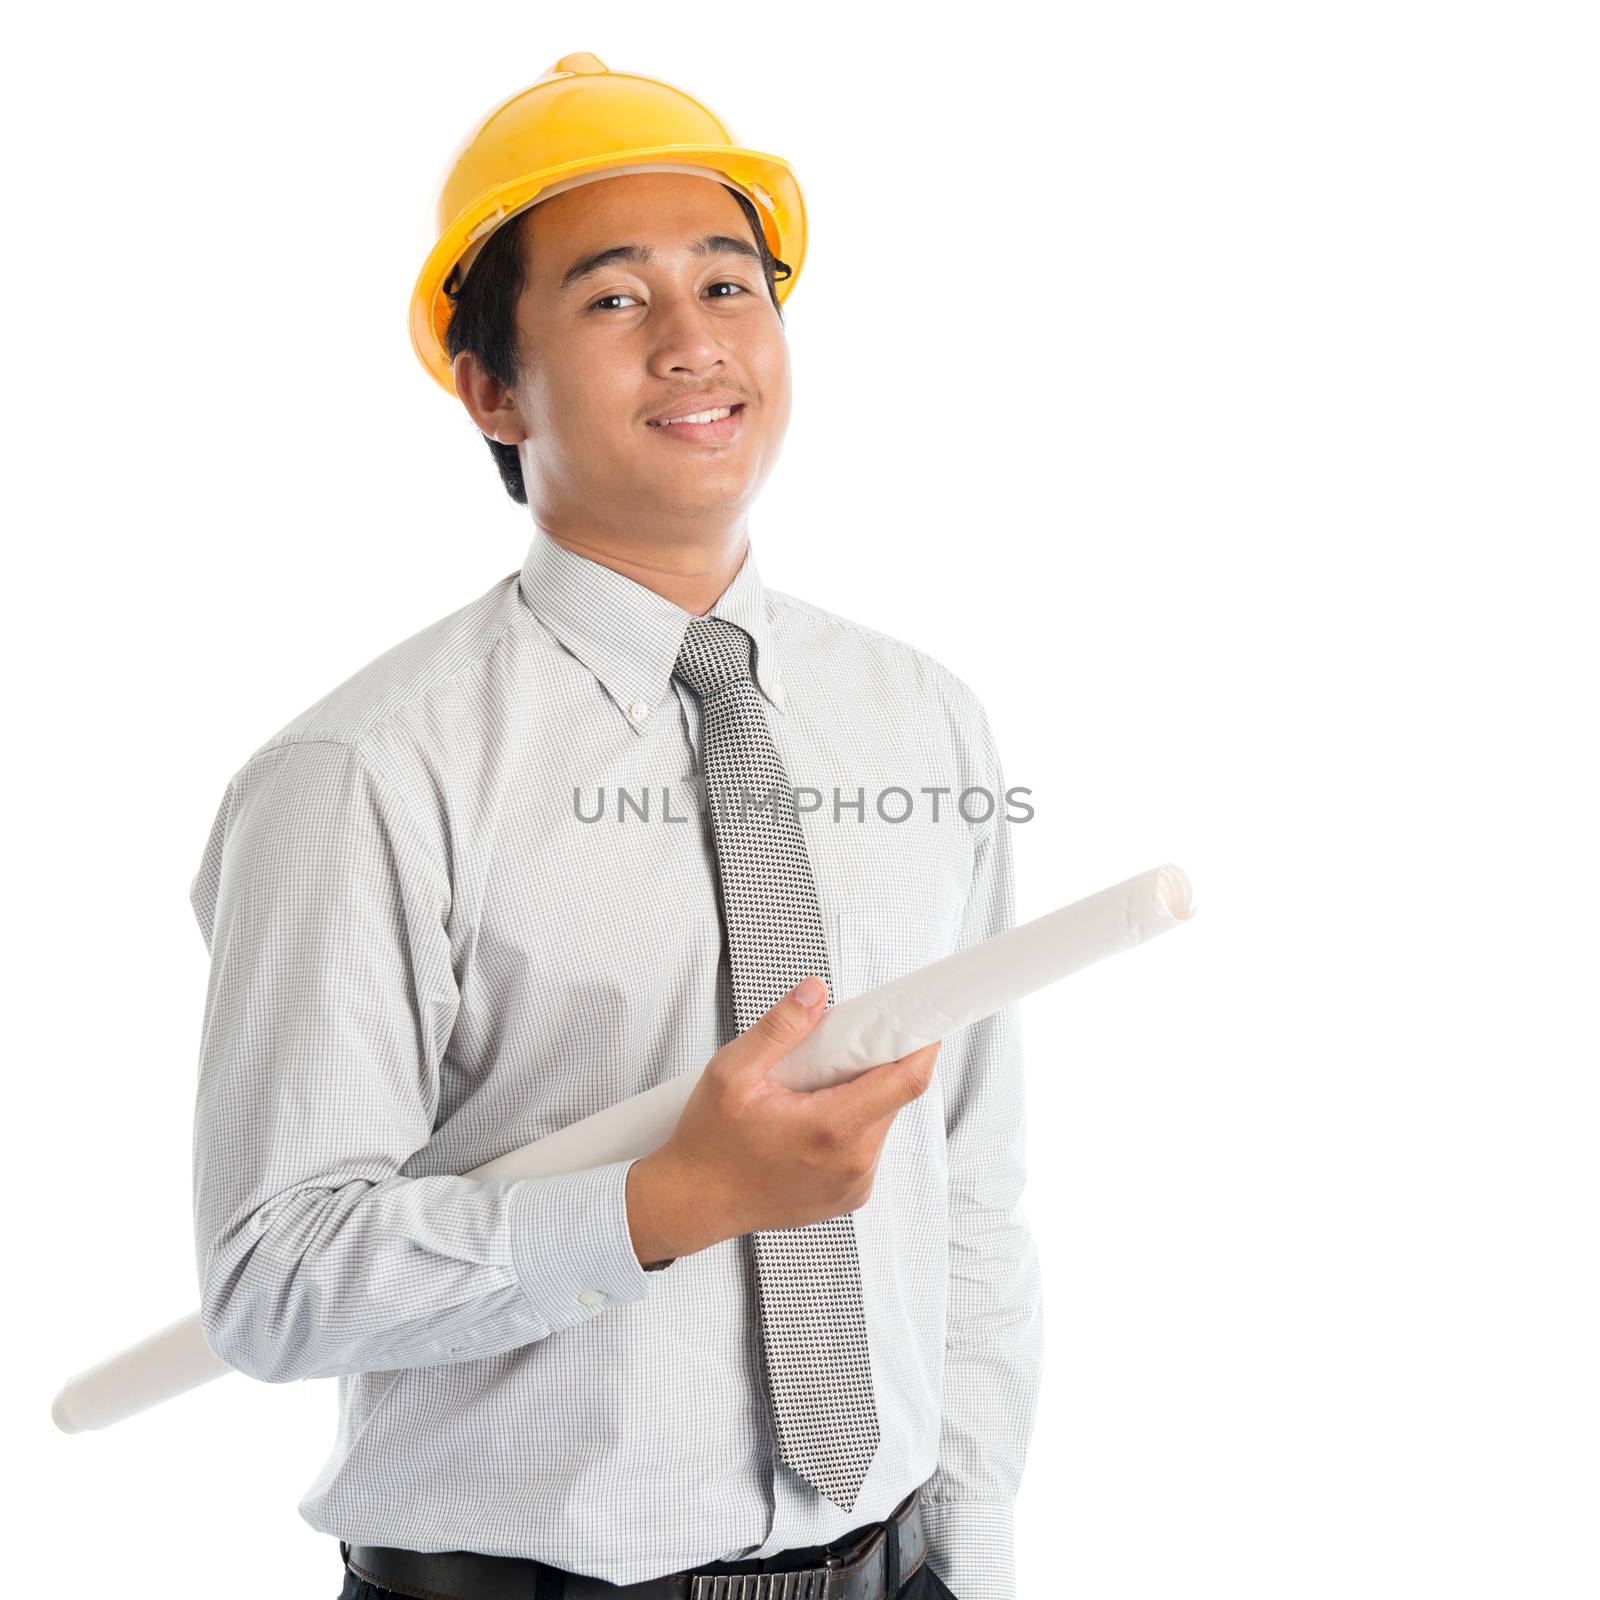 Portrait of attractive Southeast Asian engineer with yellow hard hat and blue prints smiling, standing isolated on white background.